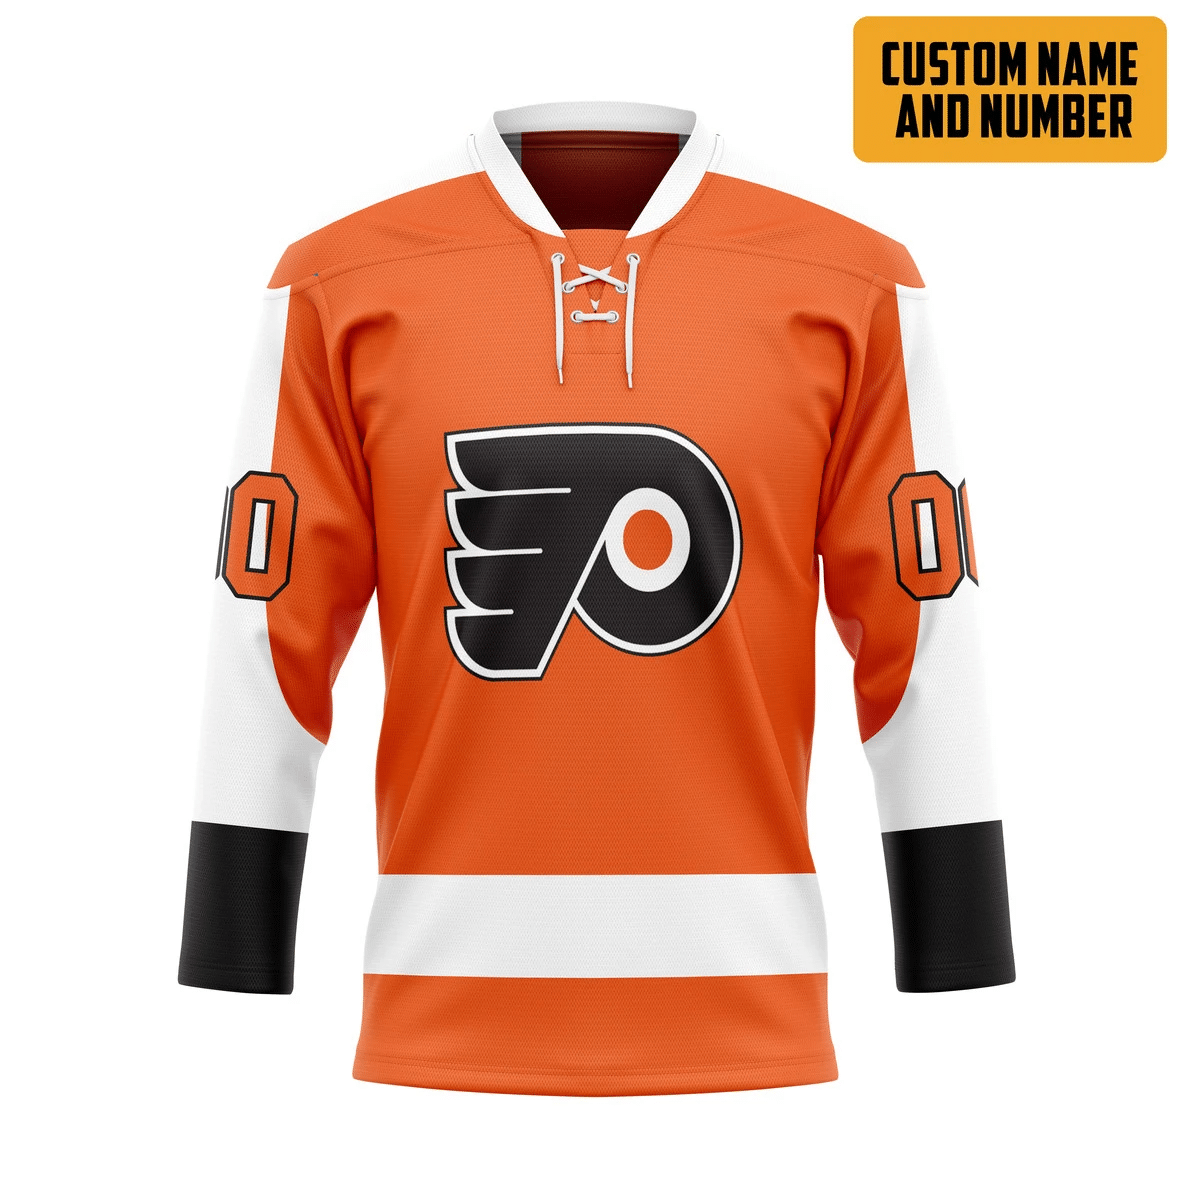 We have many different types of hockey jerseys. 26